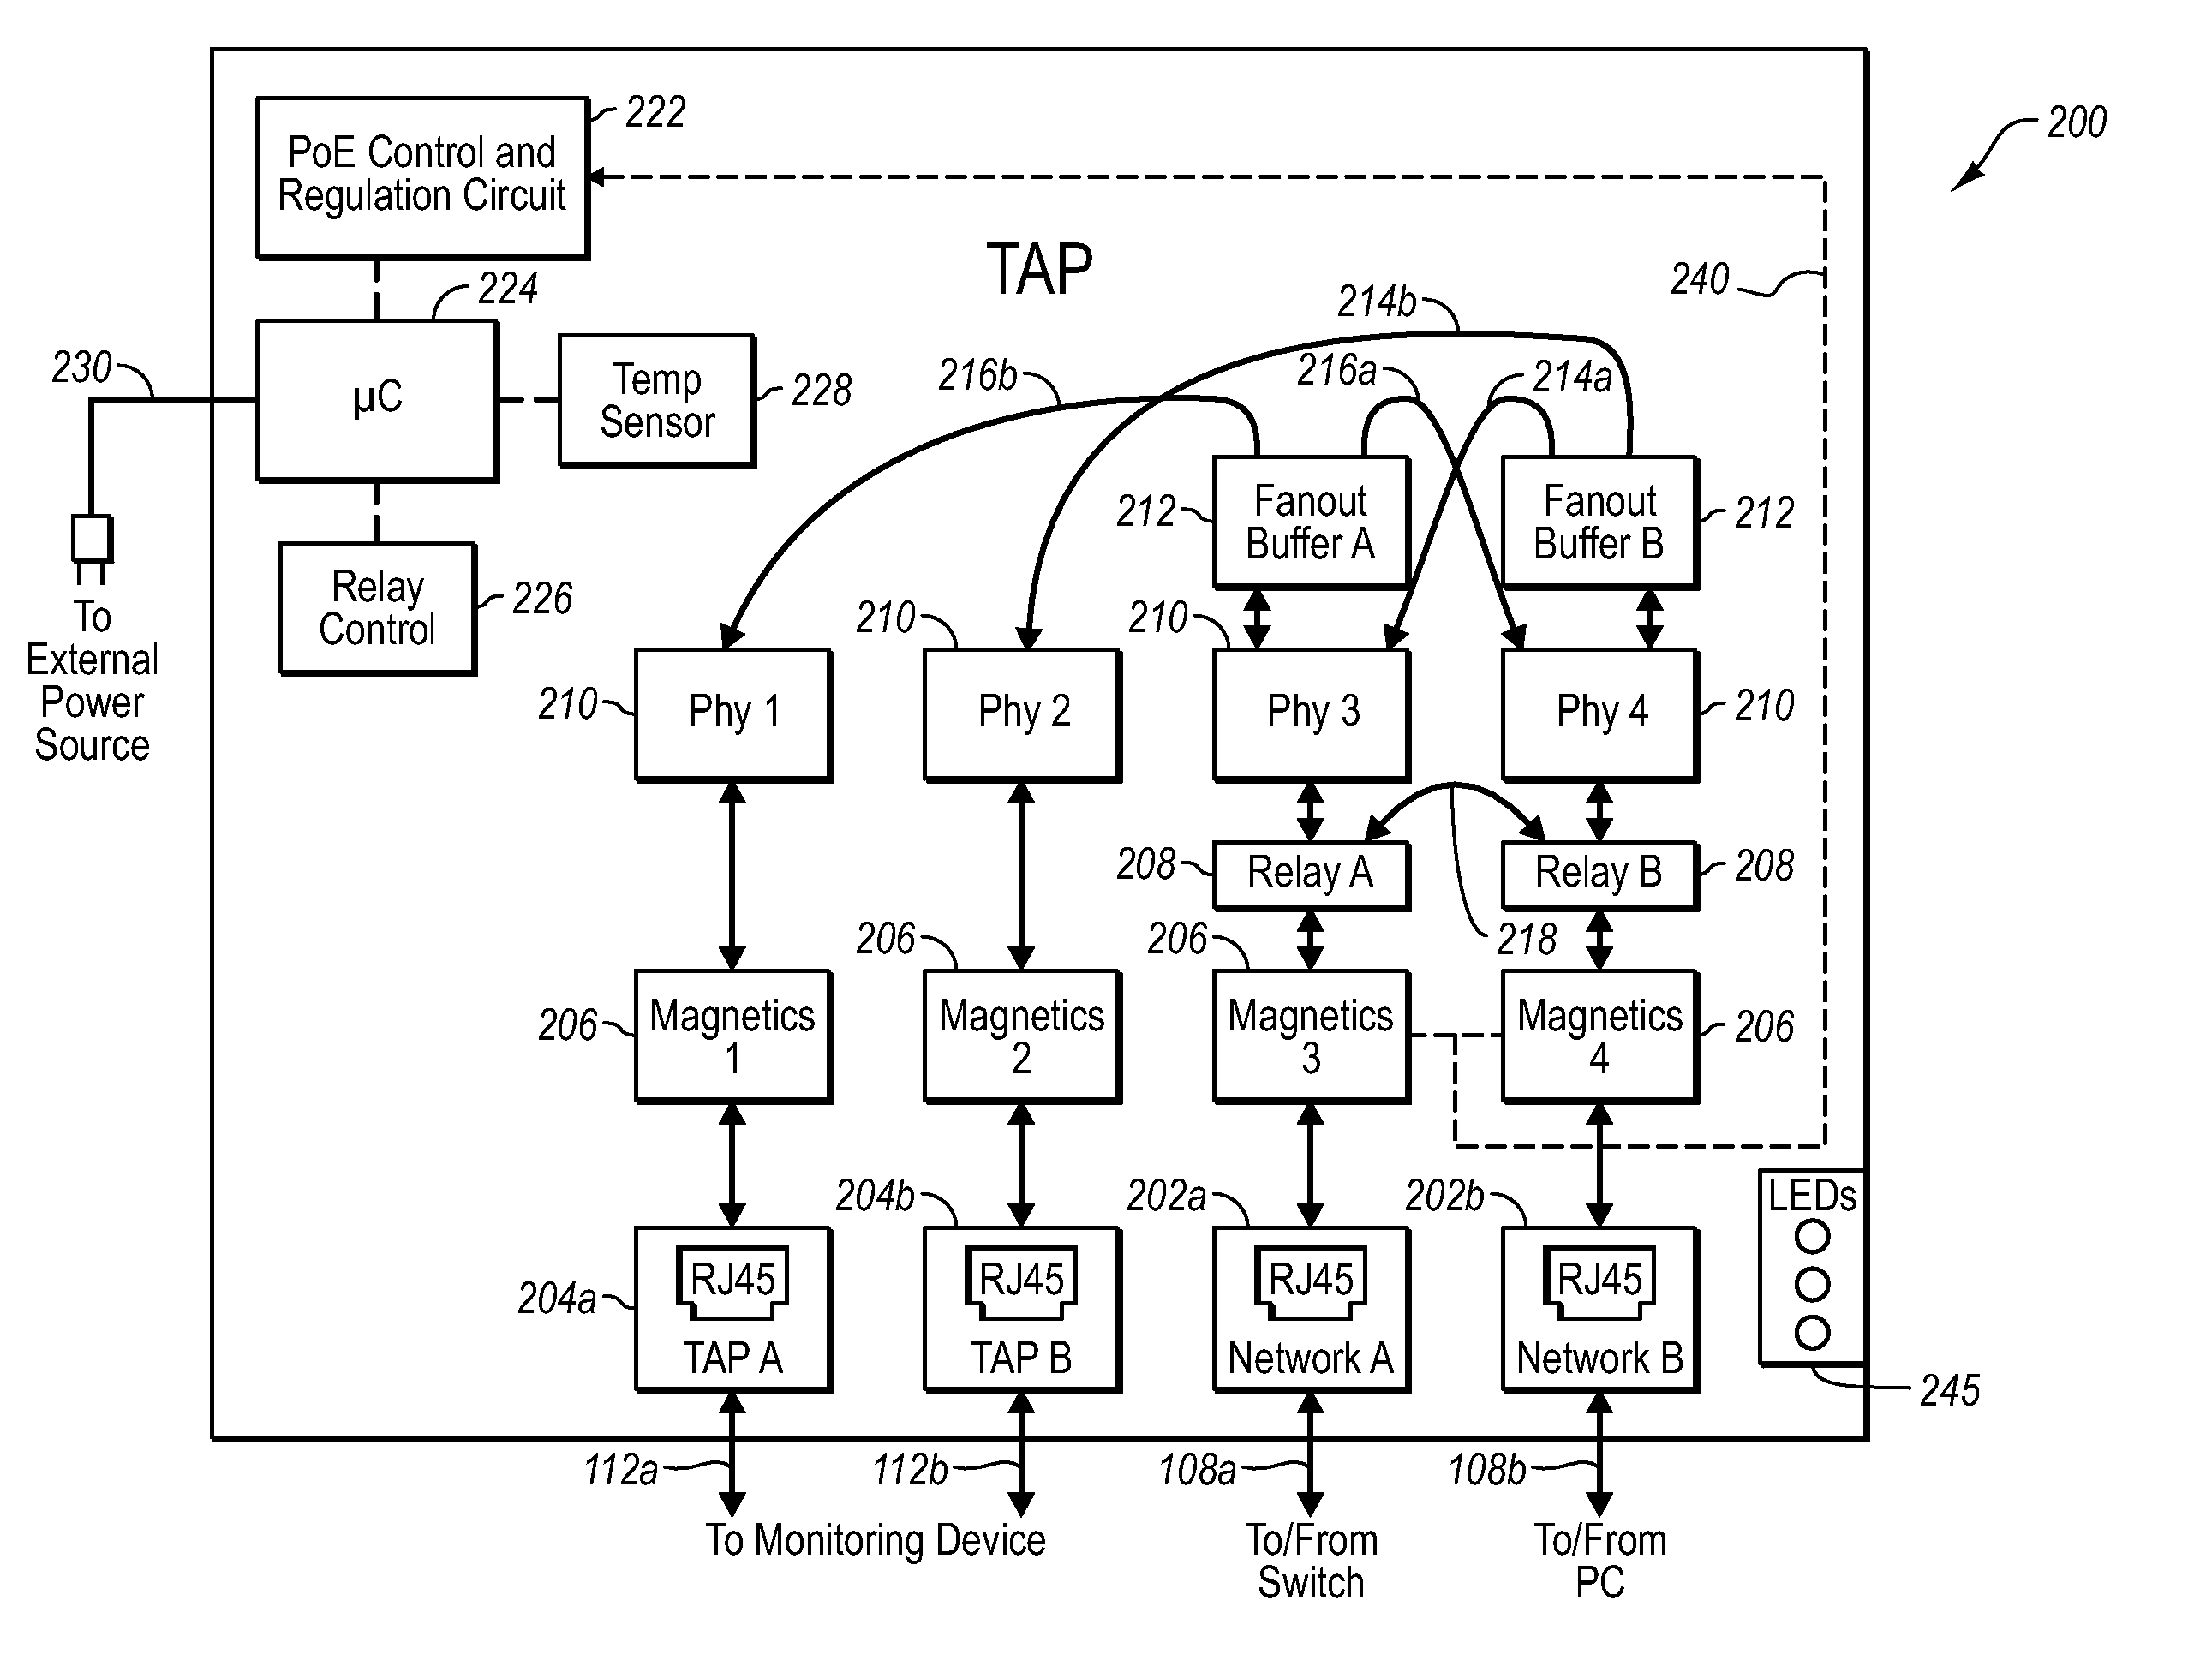 Network tap/aggregator configured for power over ethernet operation